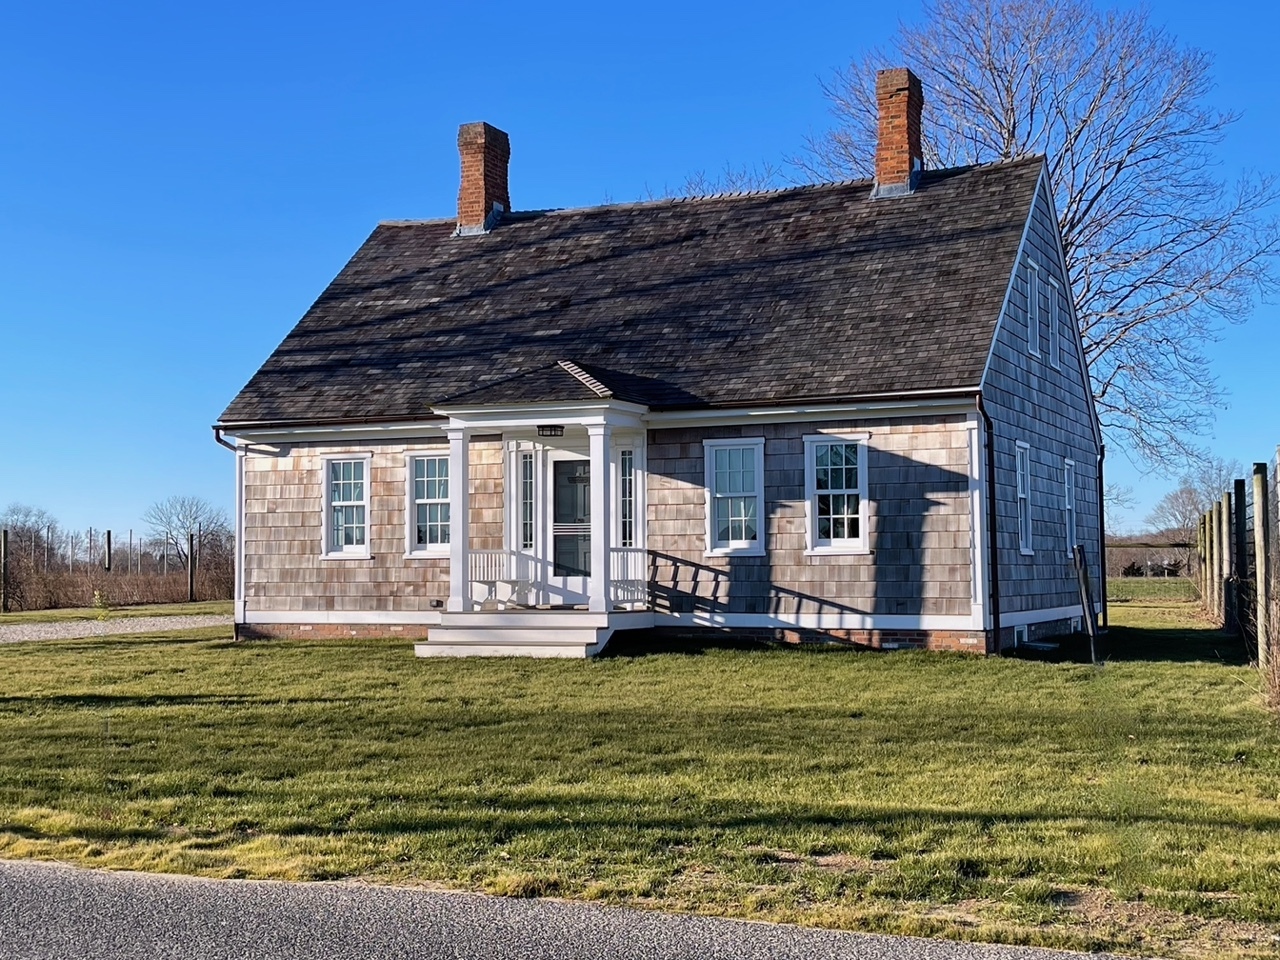 The 1747 Lt. Moses Case House at Cleo's Corner on Charnews Farm located at Horton’s Lane and Route 48 in Southold.  ANNE SURCHIN